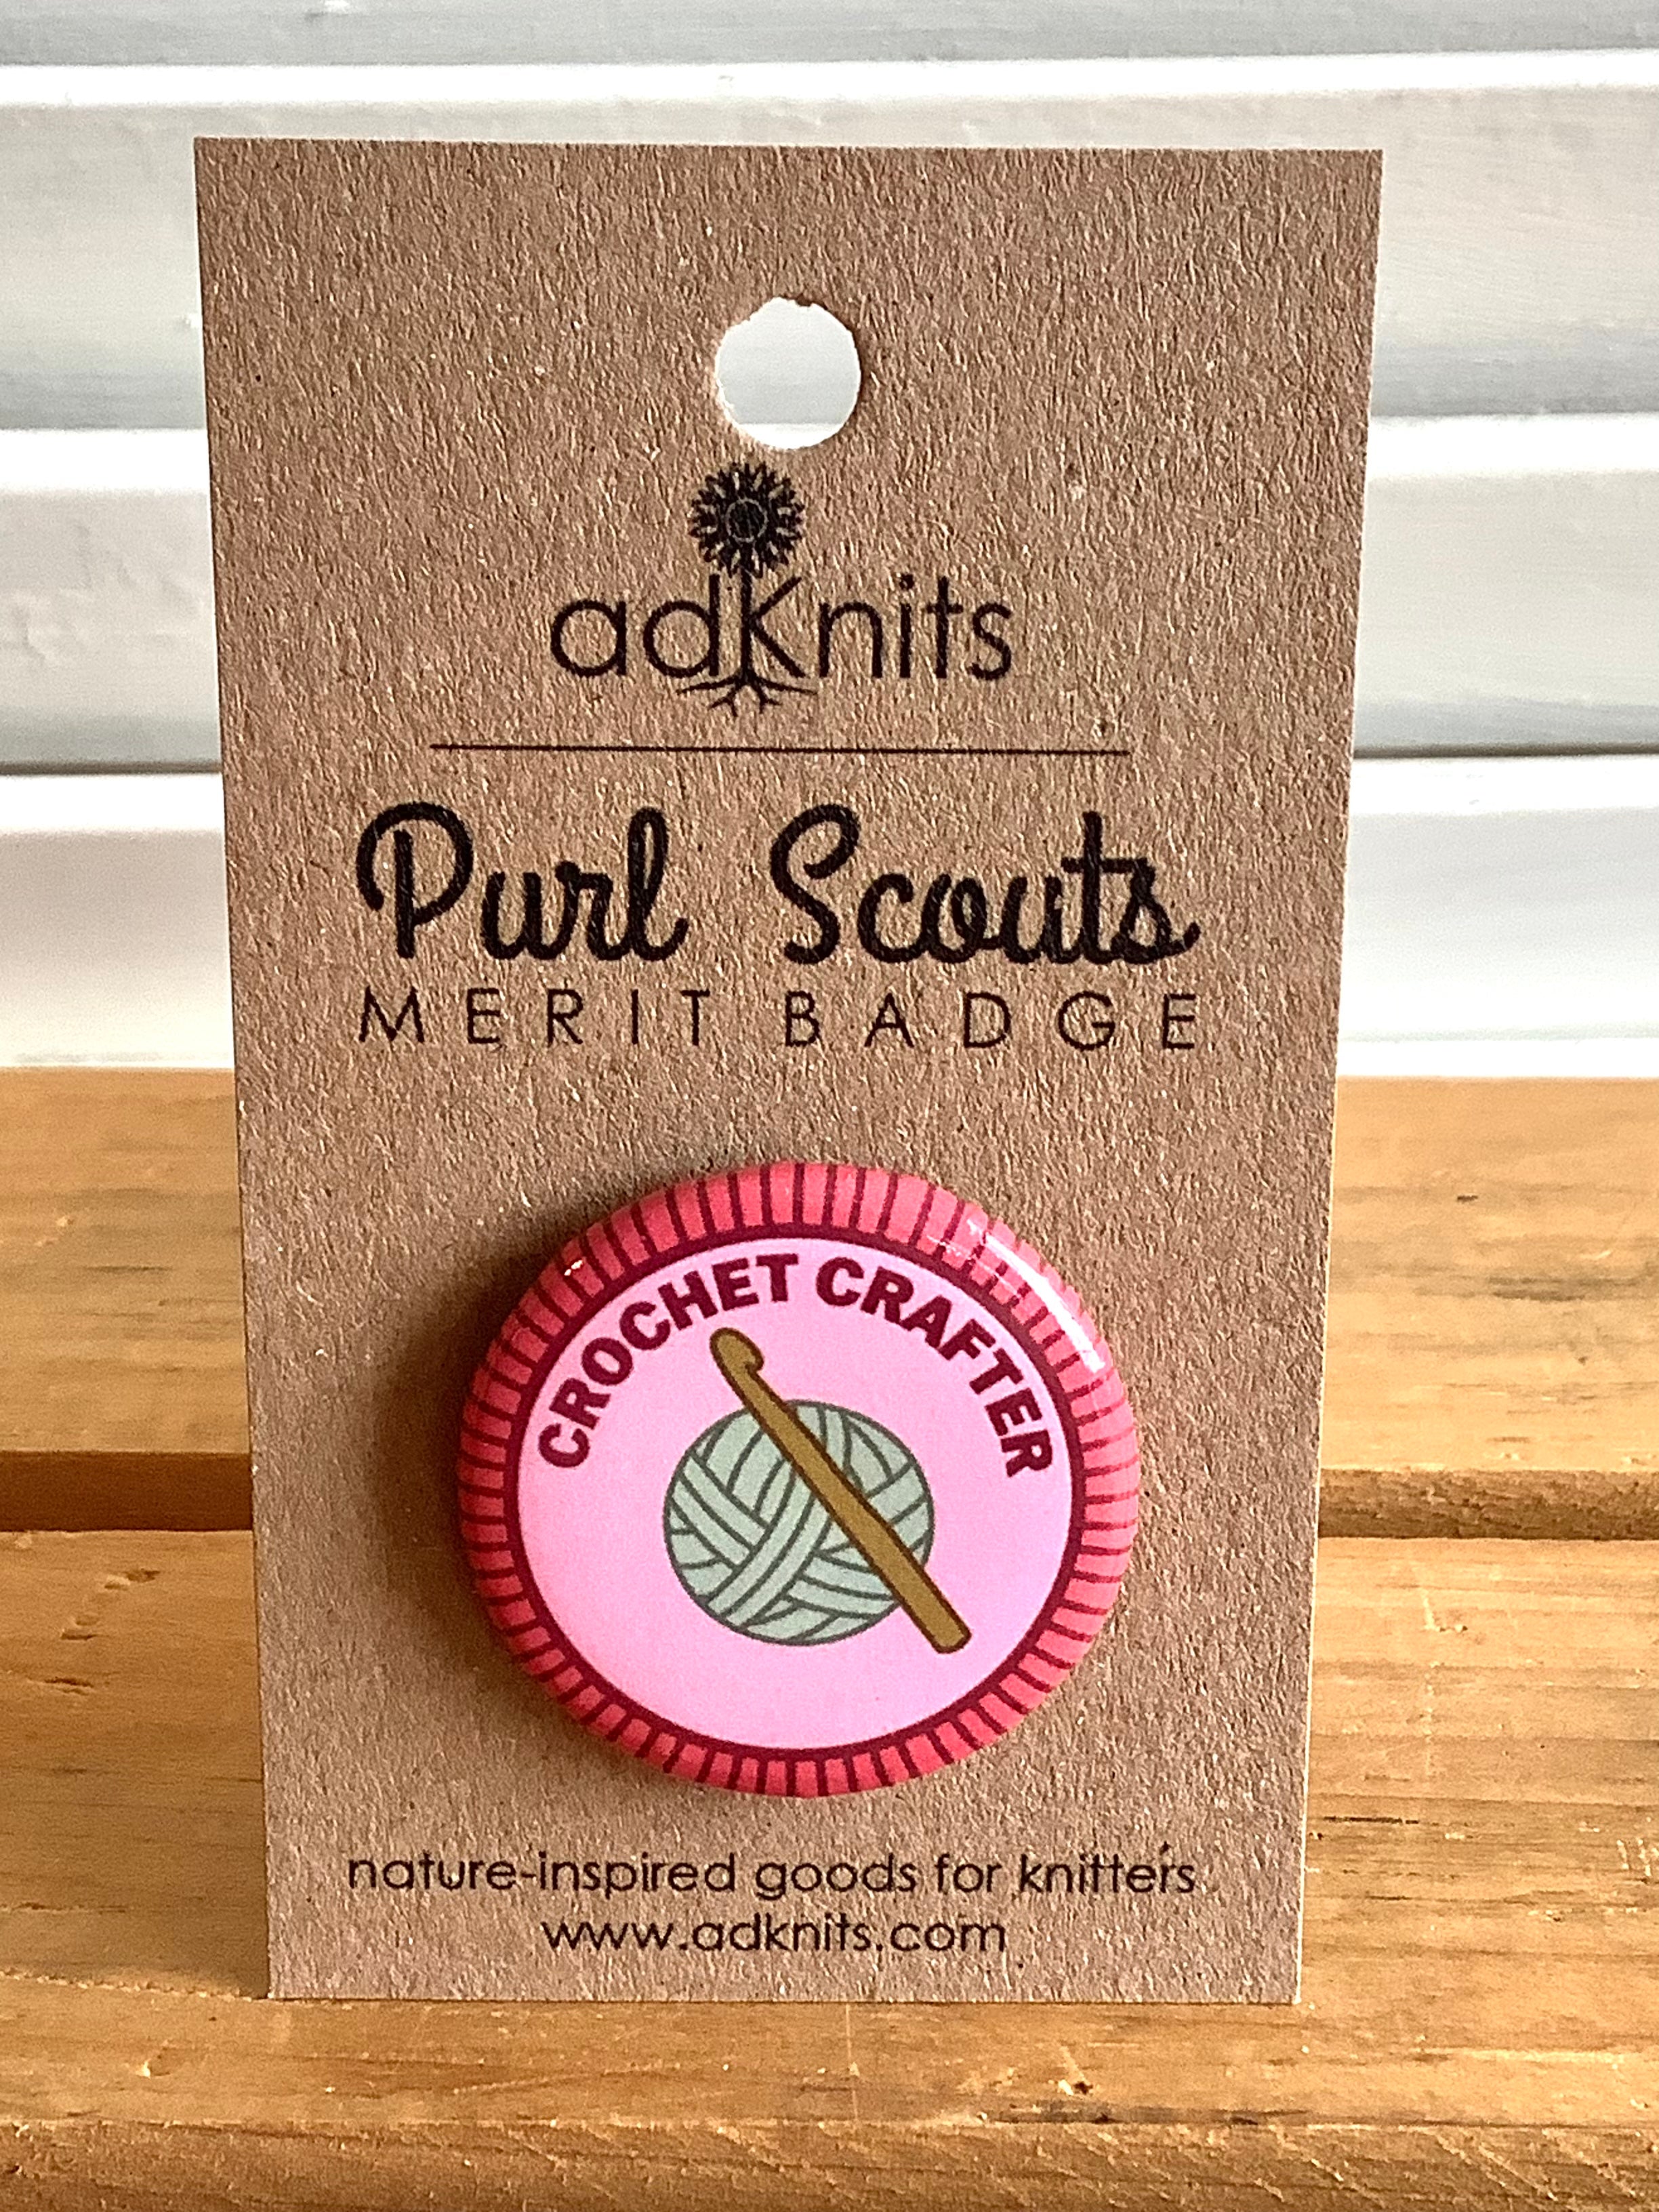 Crochet Crafter - Purl Scouts Merit Badge